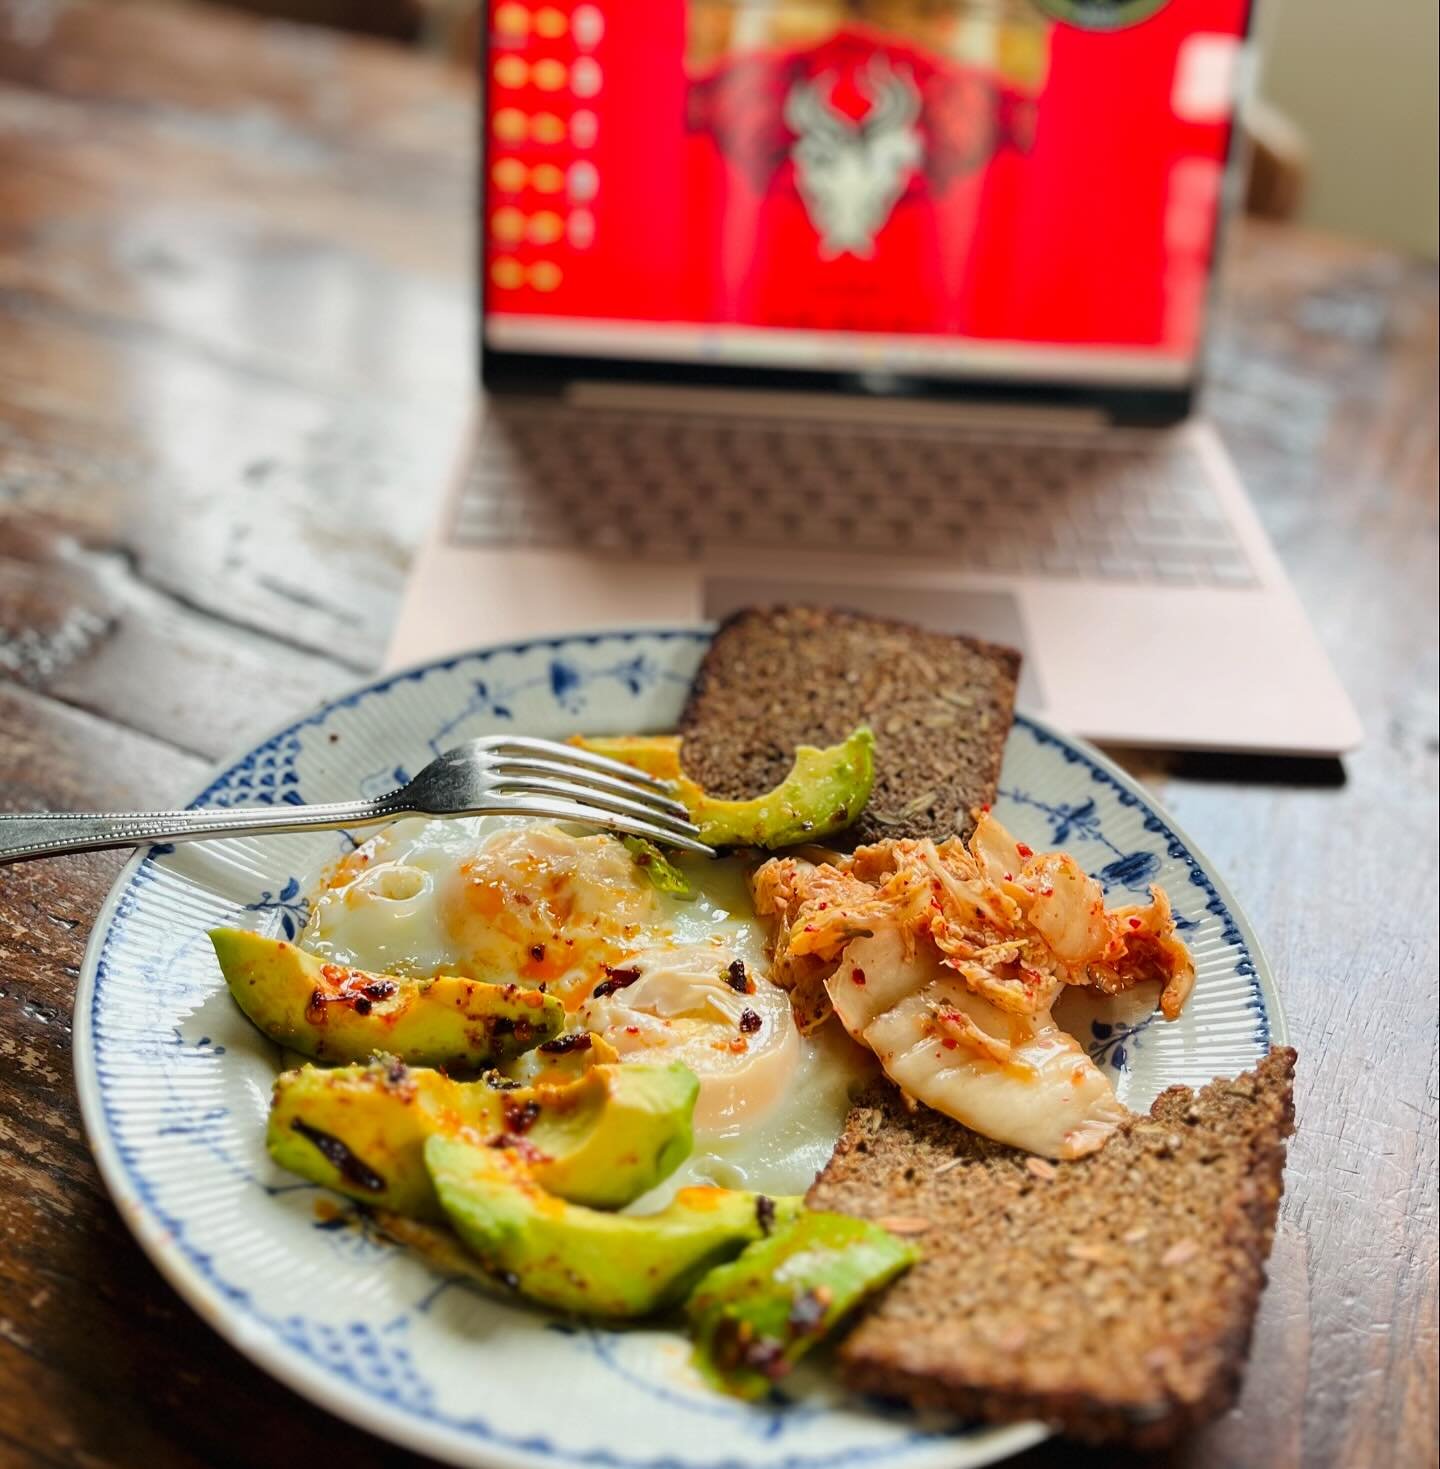 Feeling the Friday vibes with a working breakfast this morning 🦠 💥 

What could be better than kimchi 🌶️ and 🥚? 😋 

Hope everyone has some lovely weekends plans? 

#friday #vibes #combo #perfect #work #play #eat #sleep #repeat #yum #love #fermen